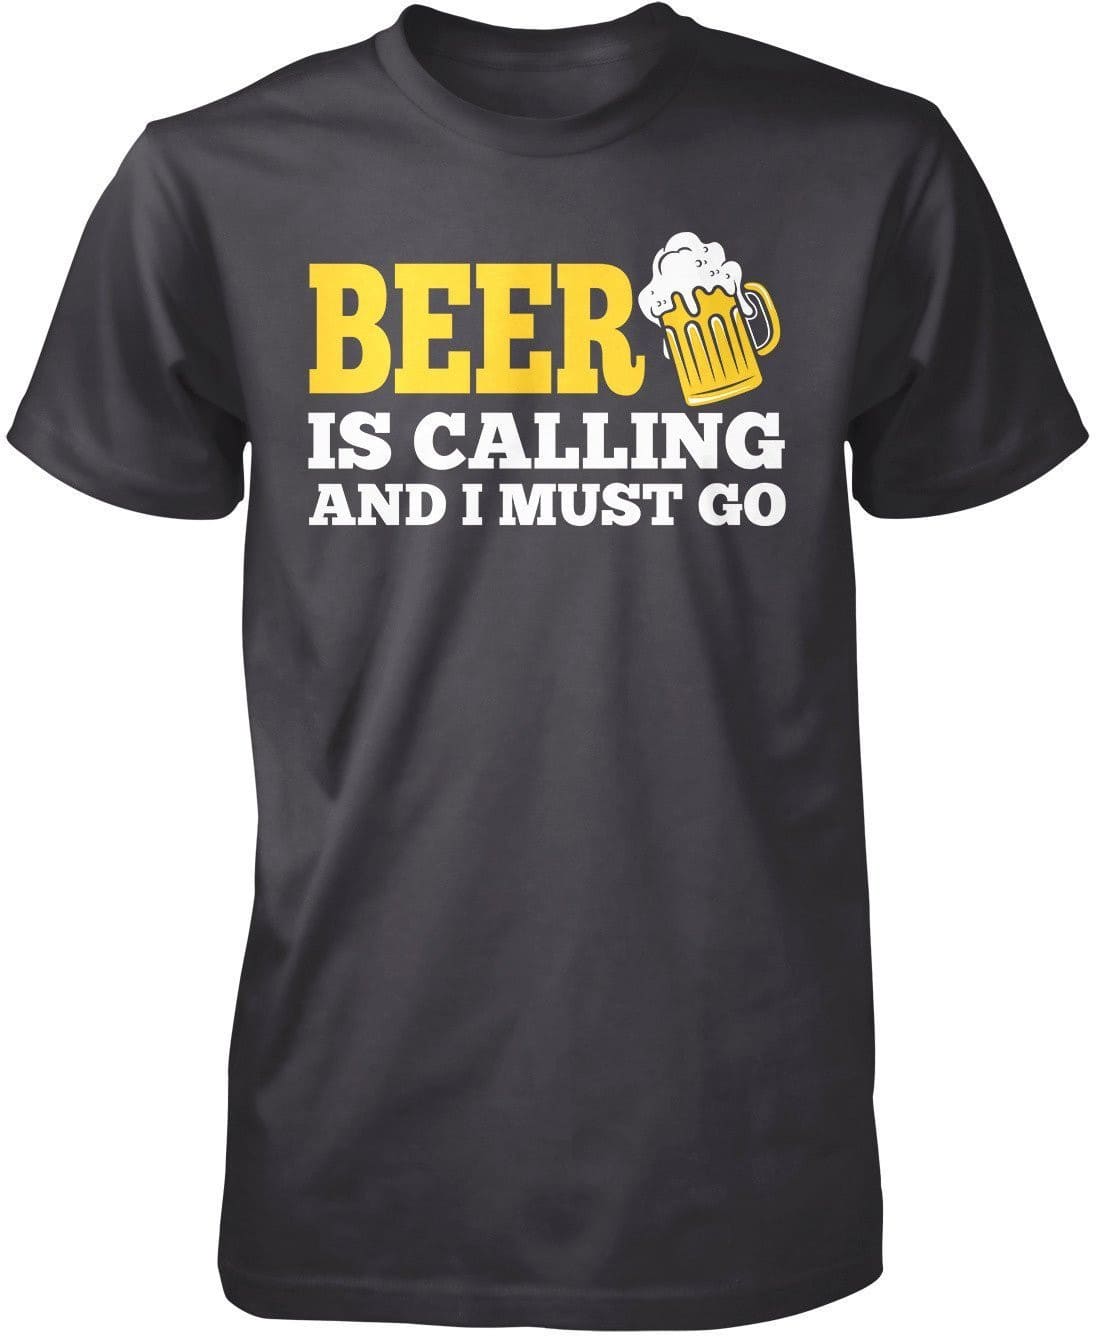 Beer Is Calling and I Must Go T-Shirt